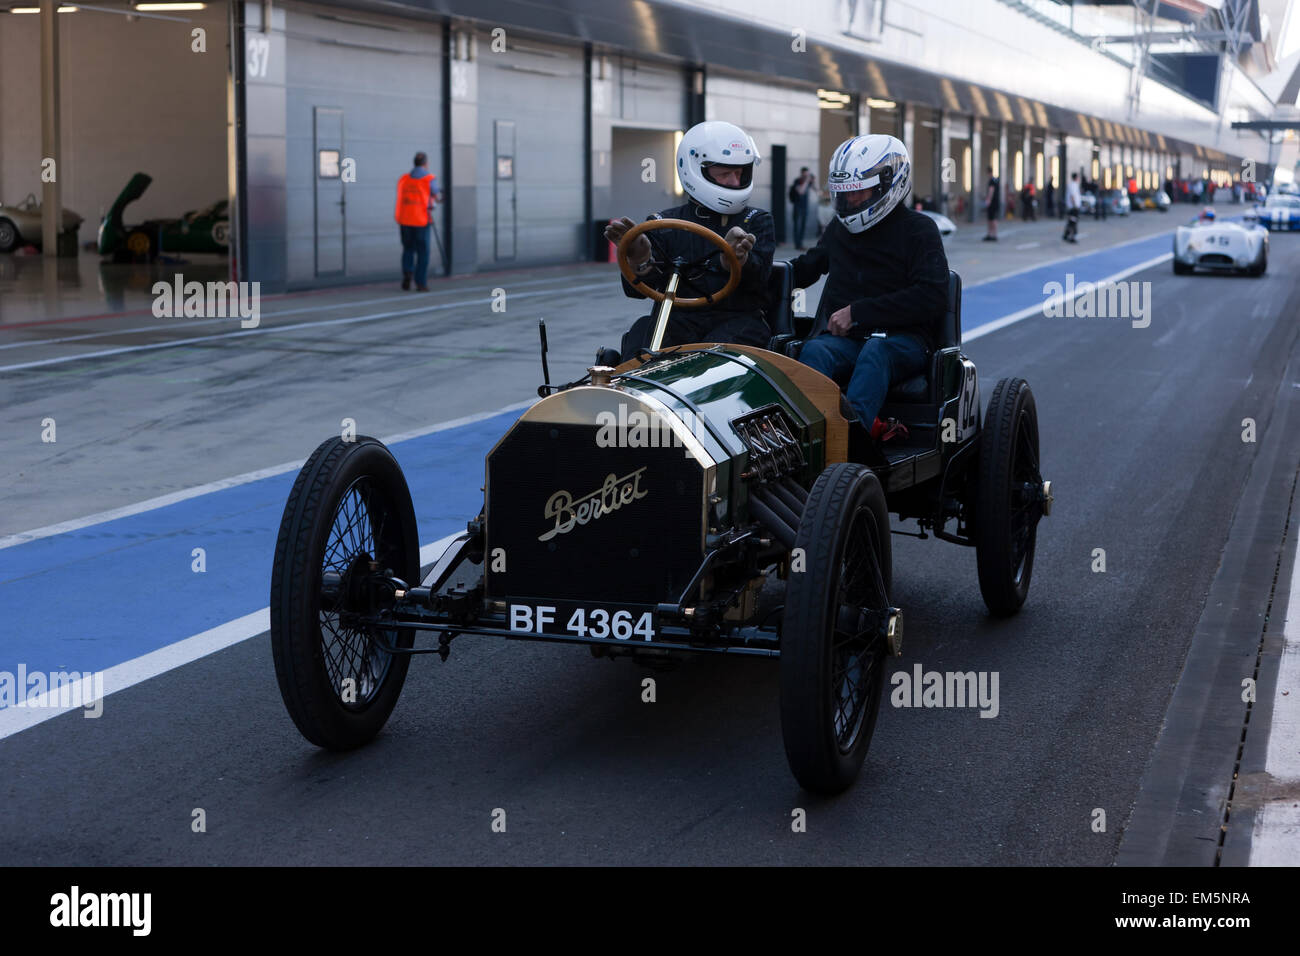 . A passenger rides in a classic 1909 Berliet  race car. A passenger was chatting to the driver in the pit lane at Silverstone, as they wait to gain access to the race track. Stock Photo